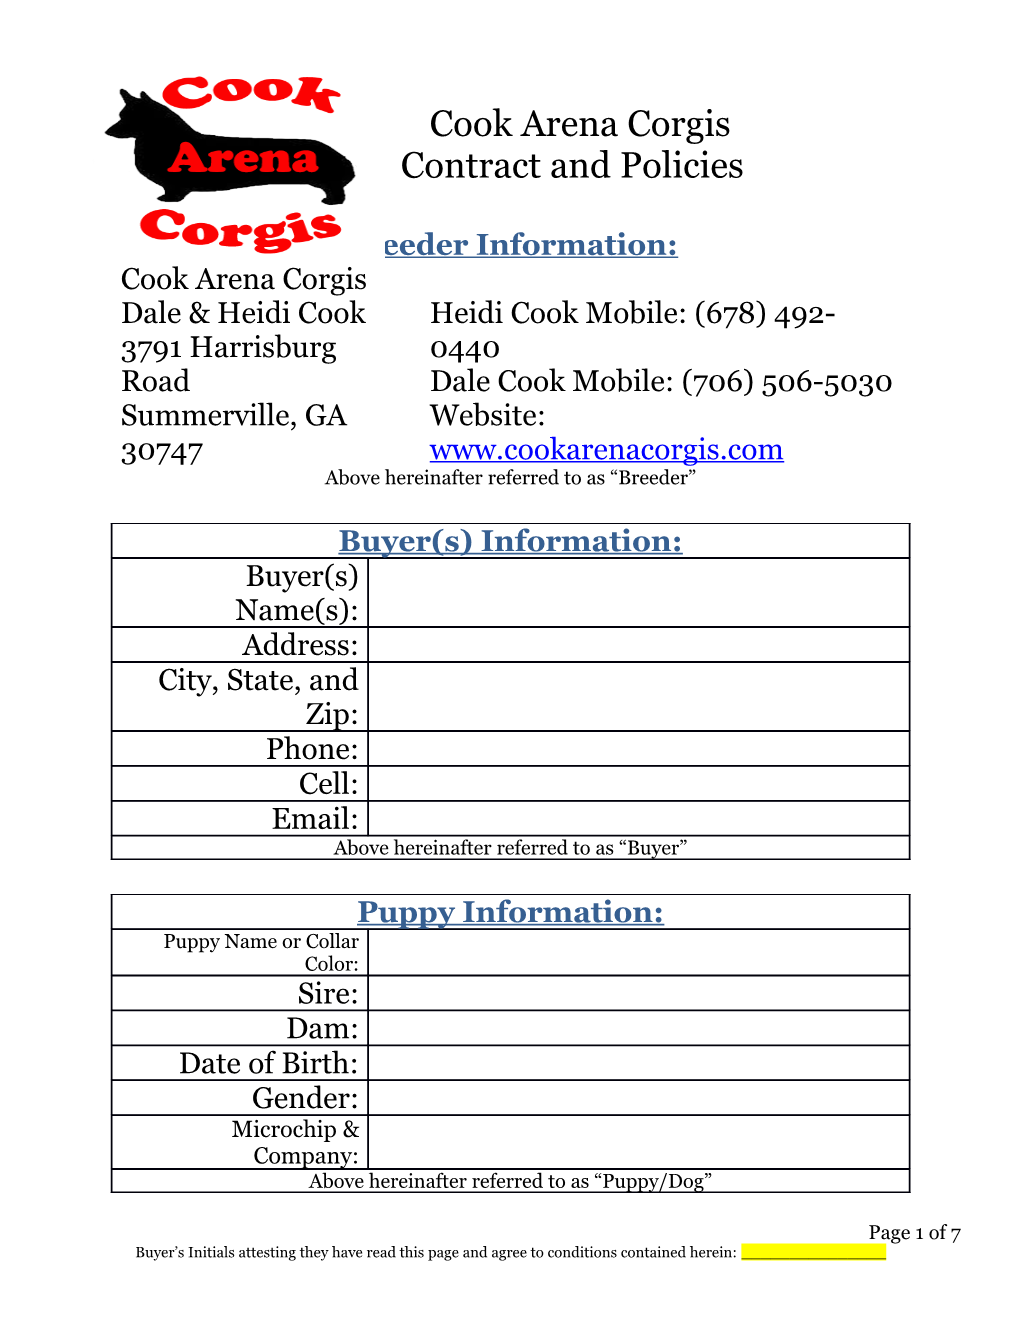 Terms of Contract and Registration Policies